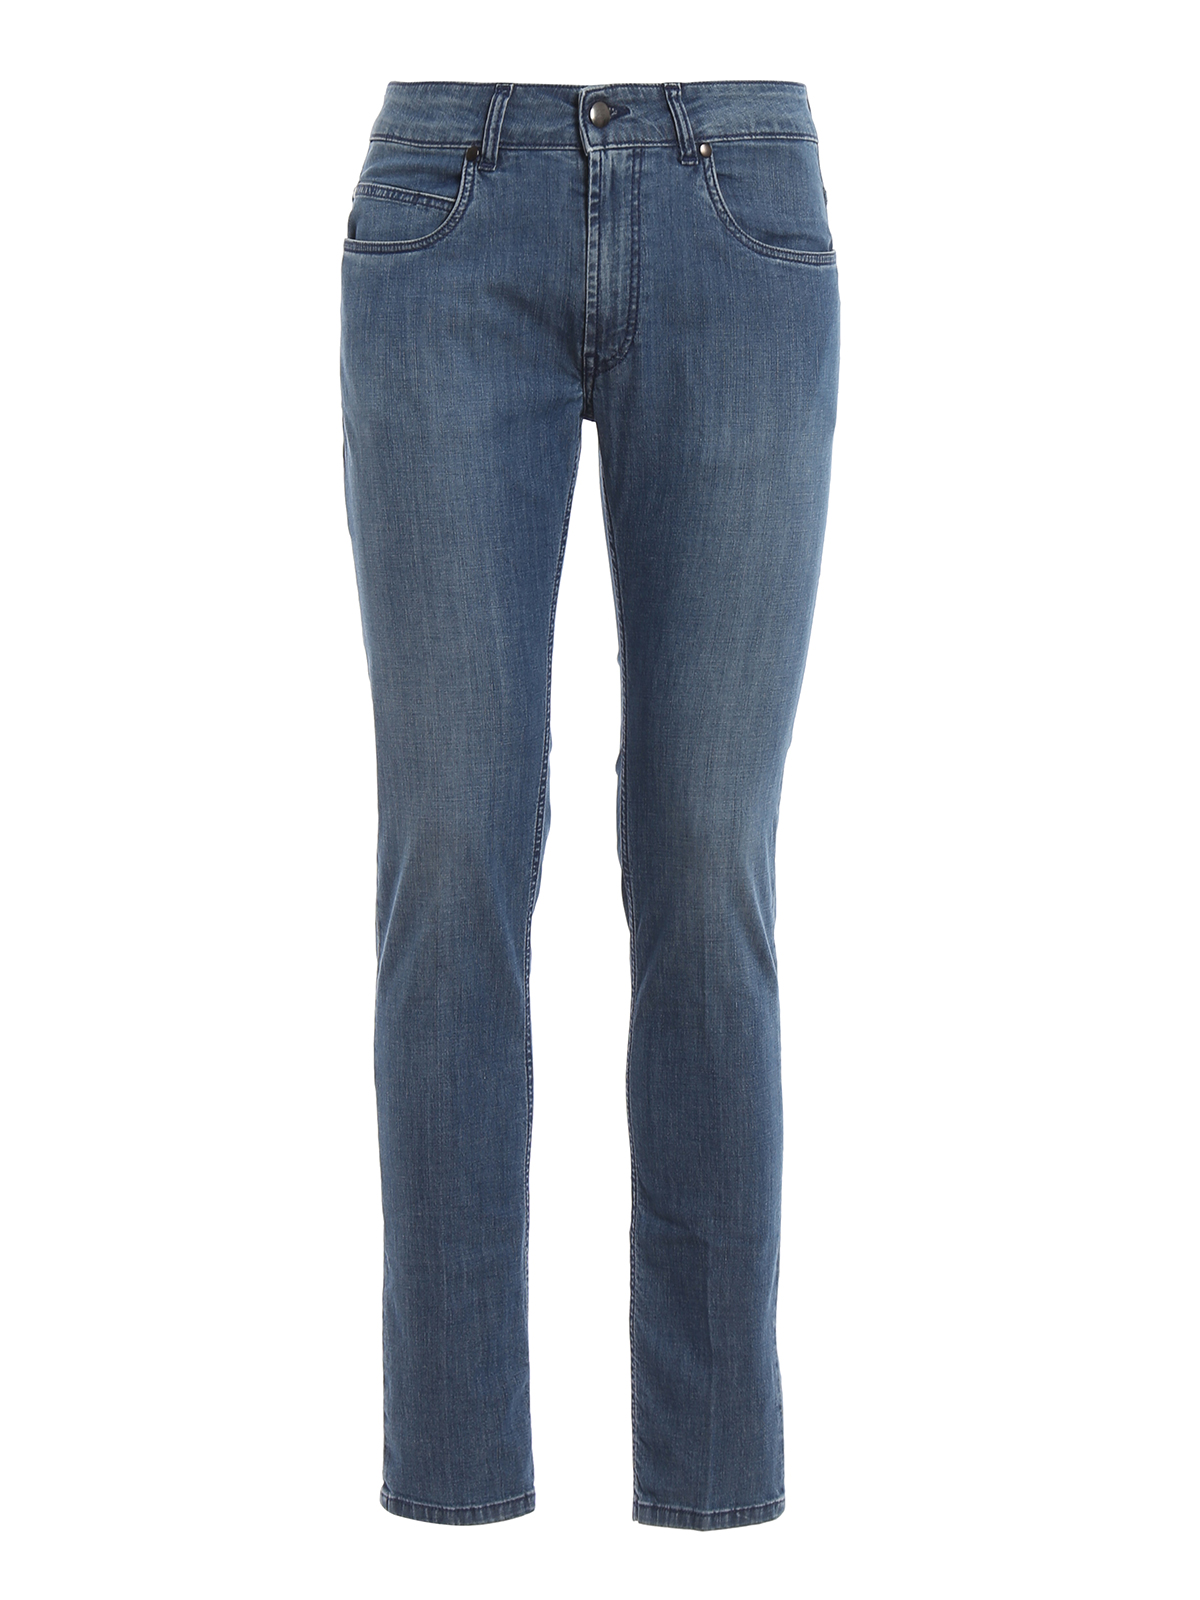 Fay - Faded stretch cotton denim jeans - straight leg jeans ...